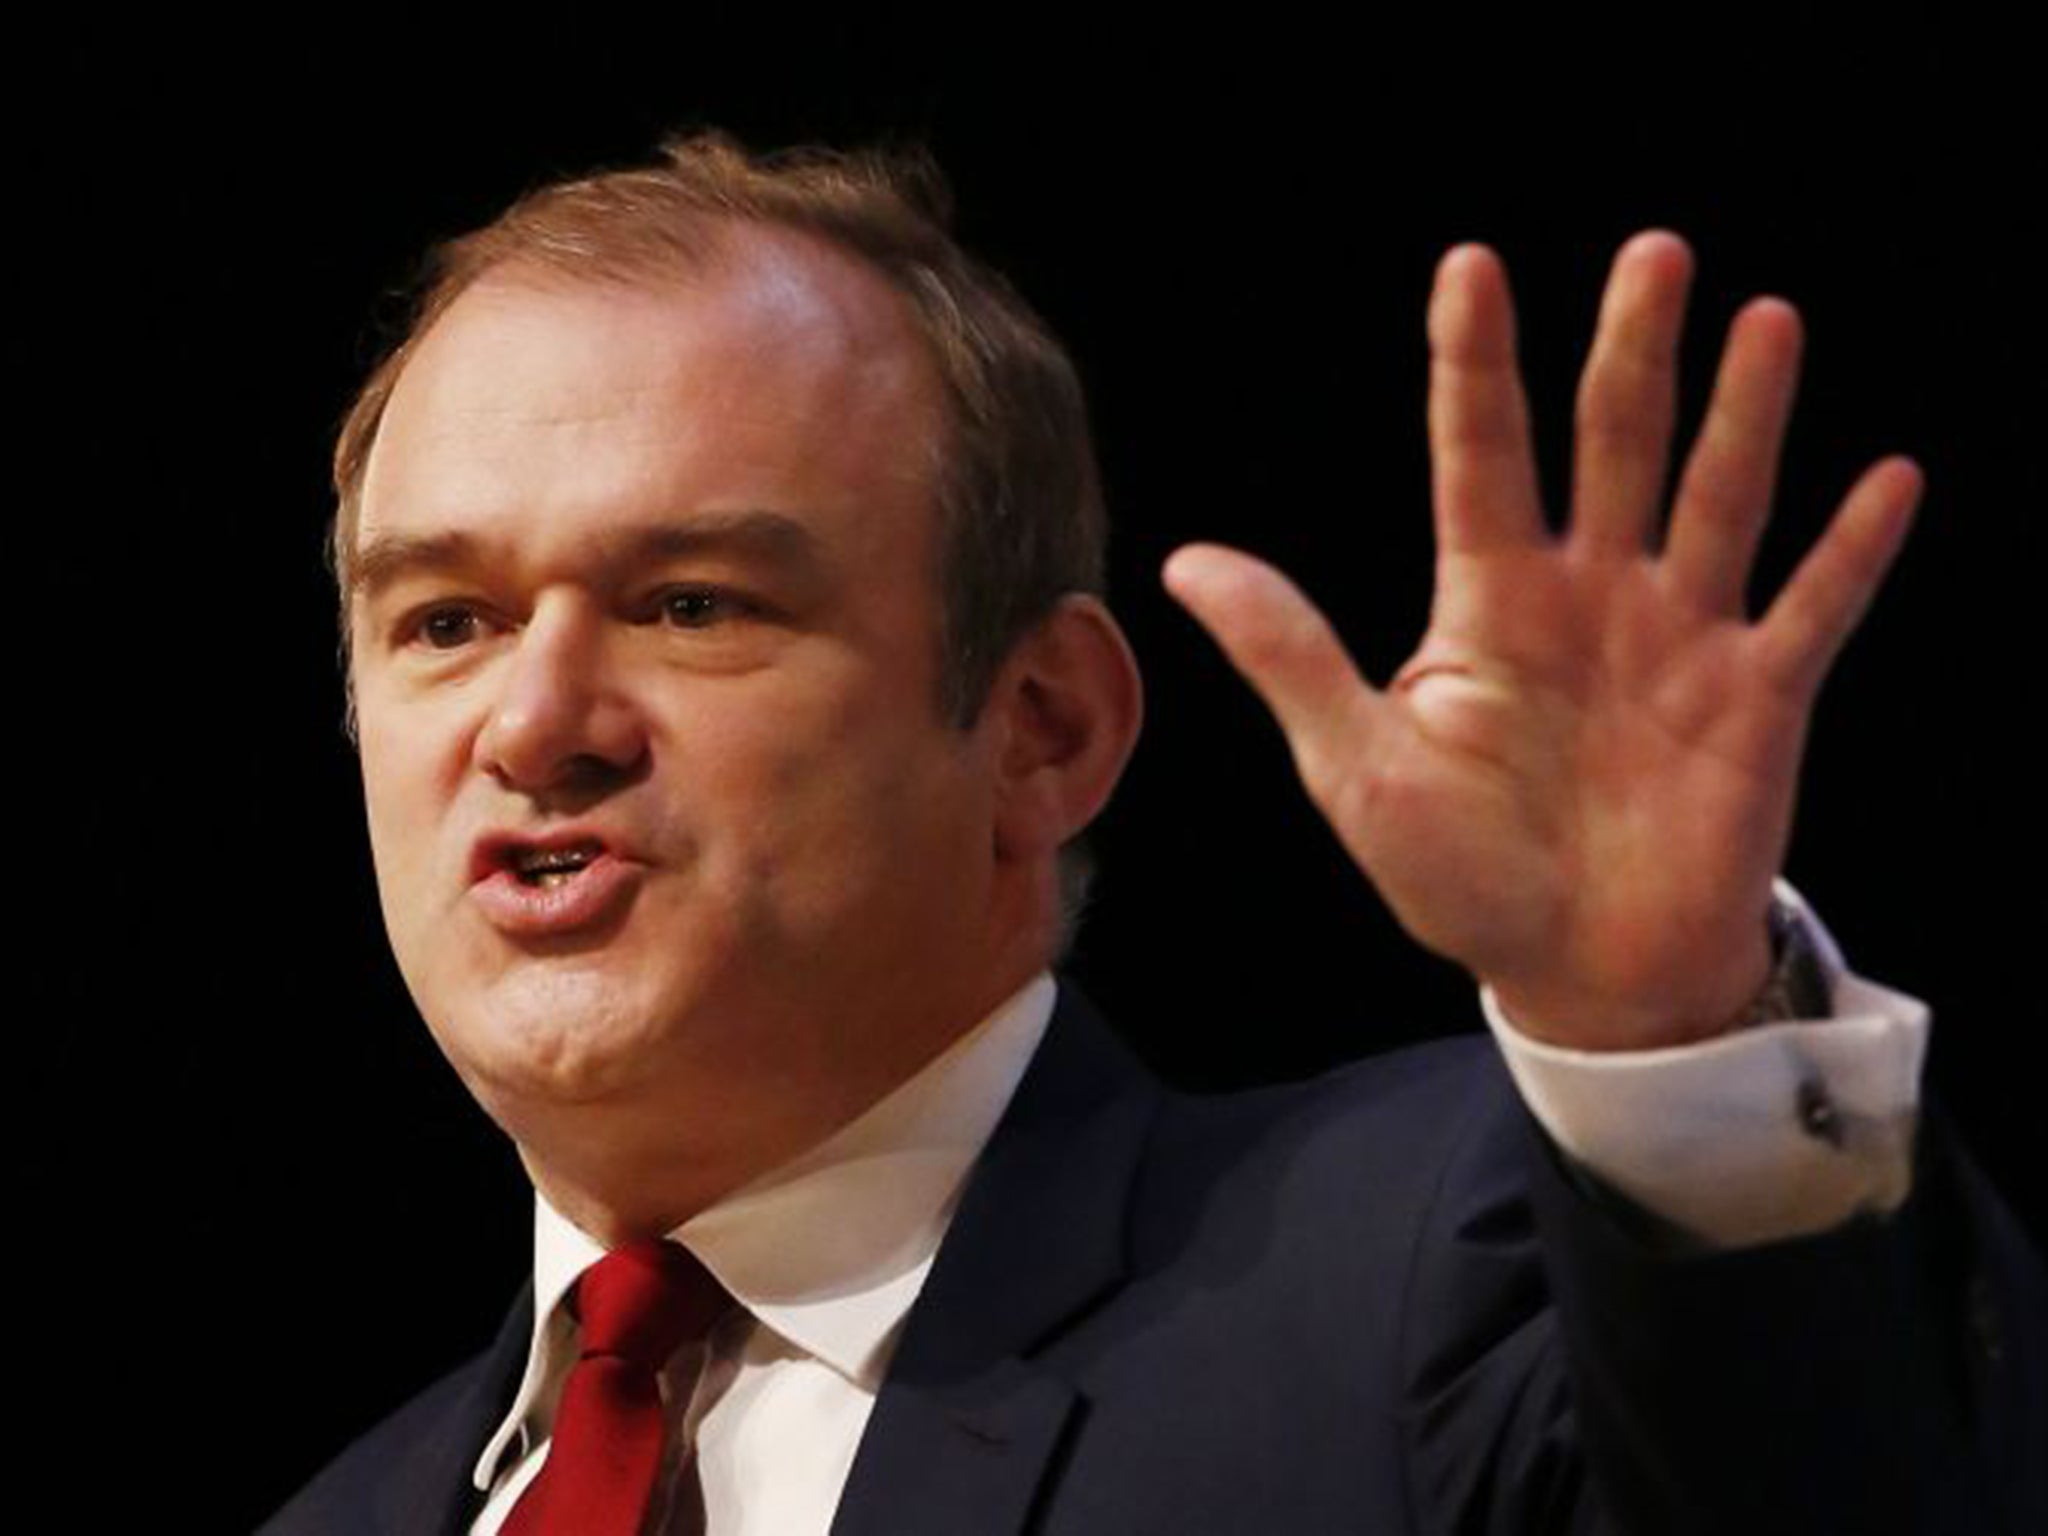 Former Energy Secretary Ed Davey revealed he had said "no" to Conservative requests to scrap fire safety regulations